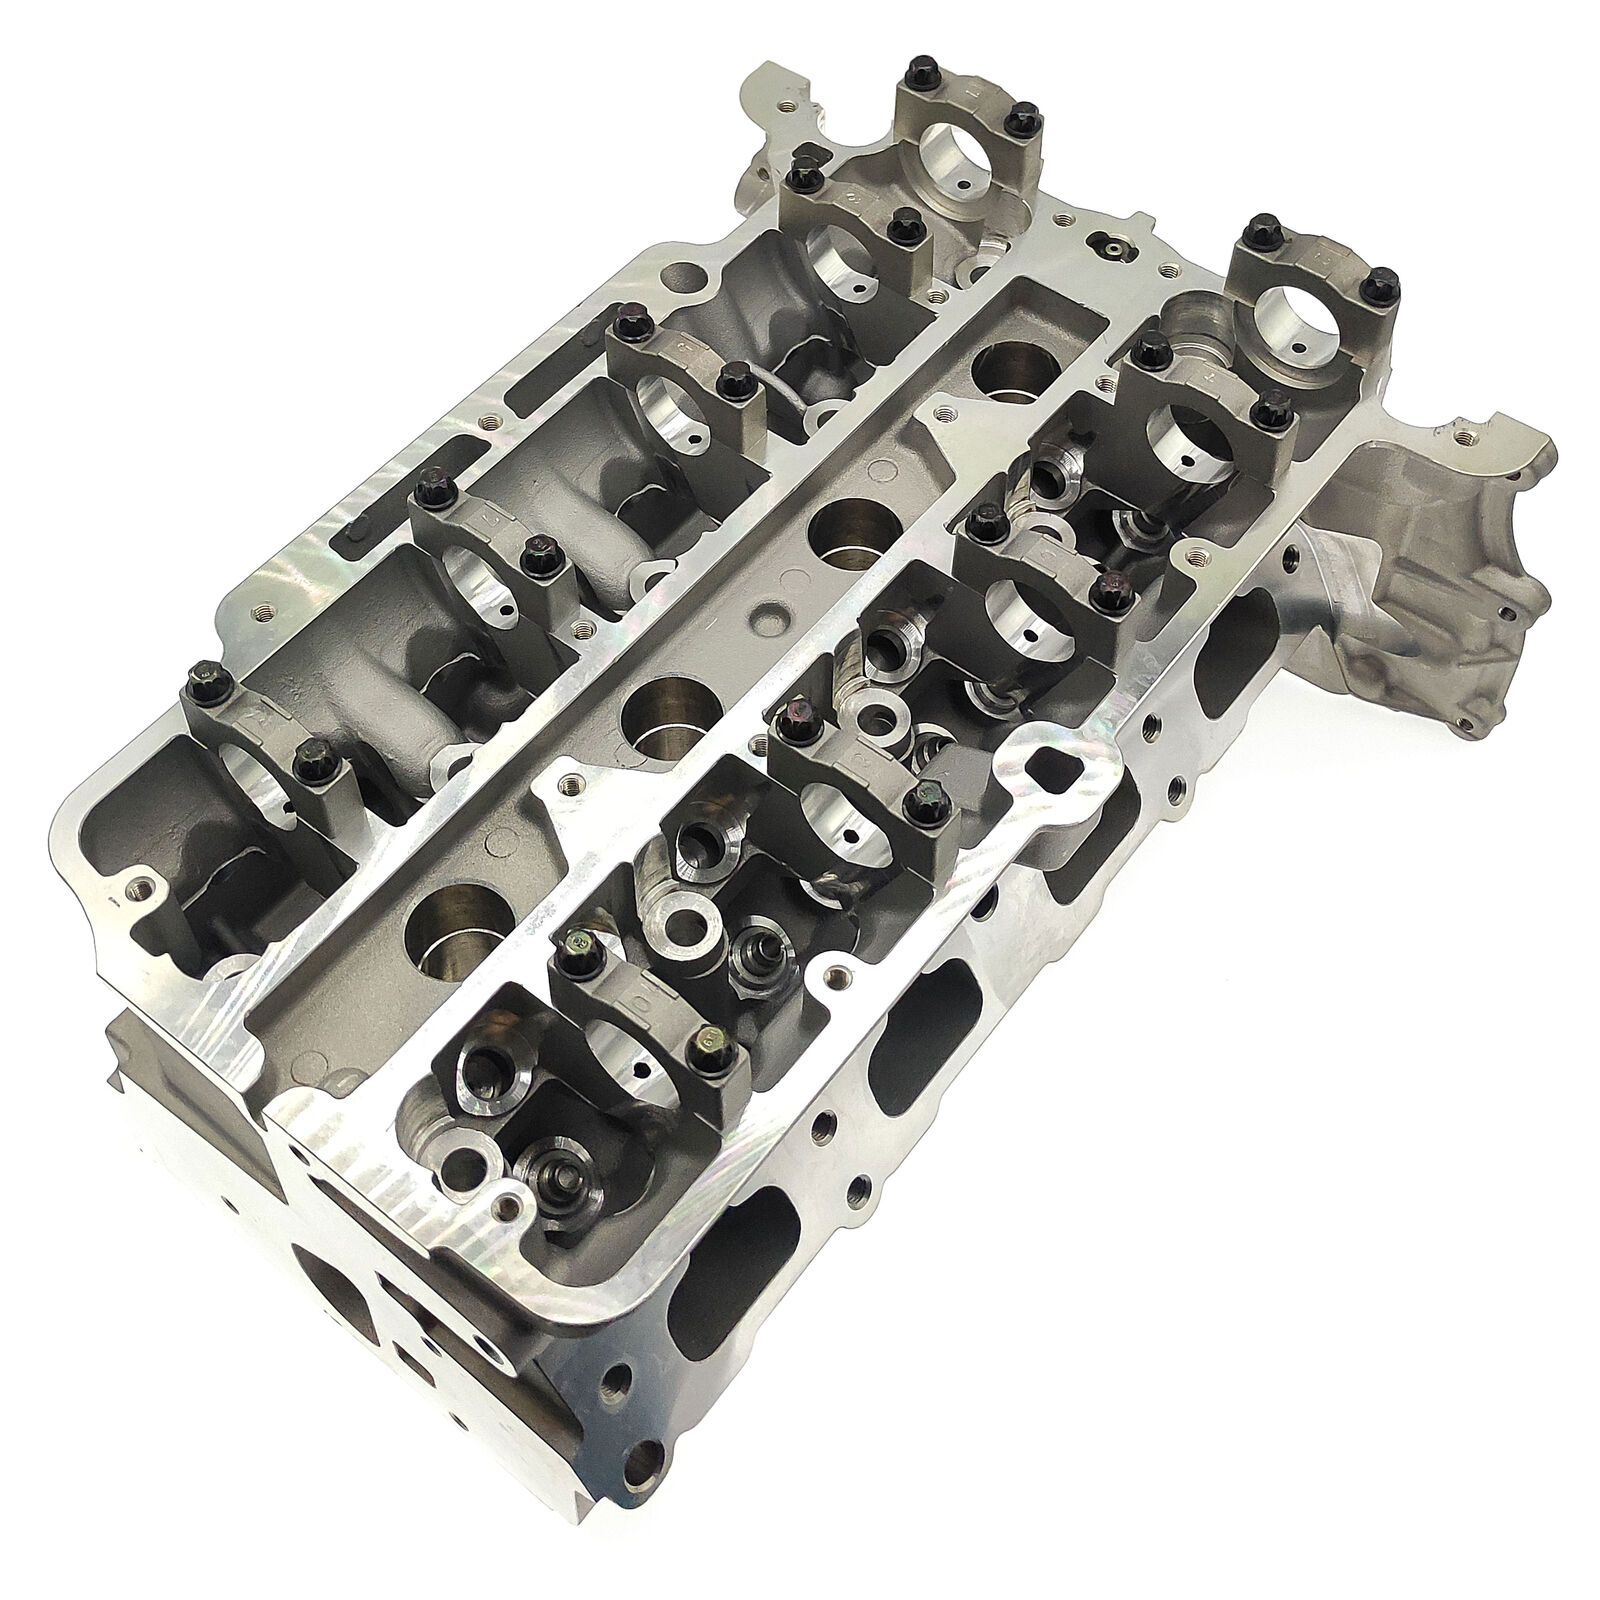 Cylinder Head For Chevrolet Cruze Sonic Encore Trax 1.4L Turbo 55565291,55573669